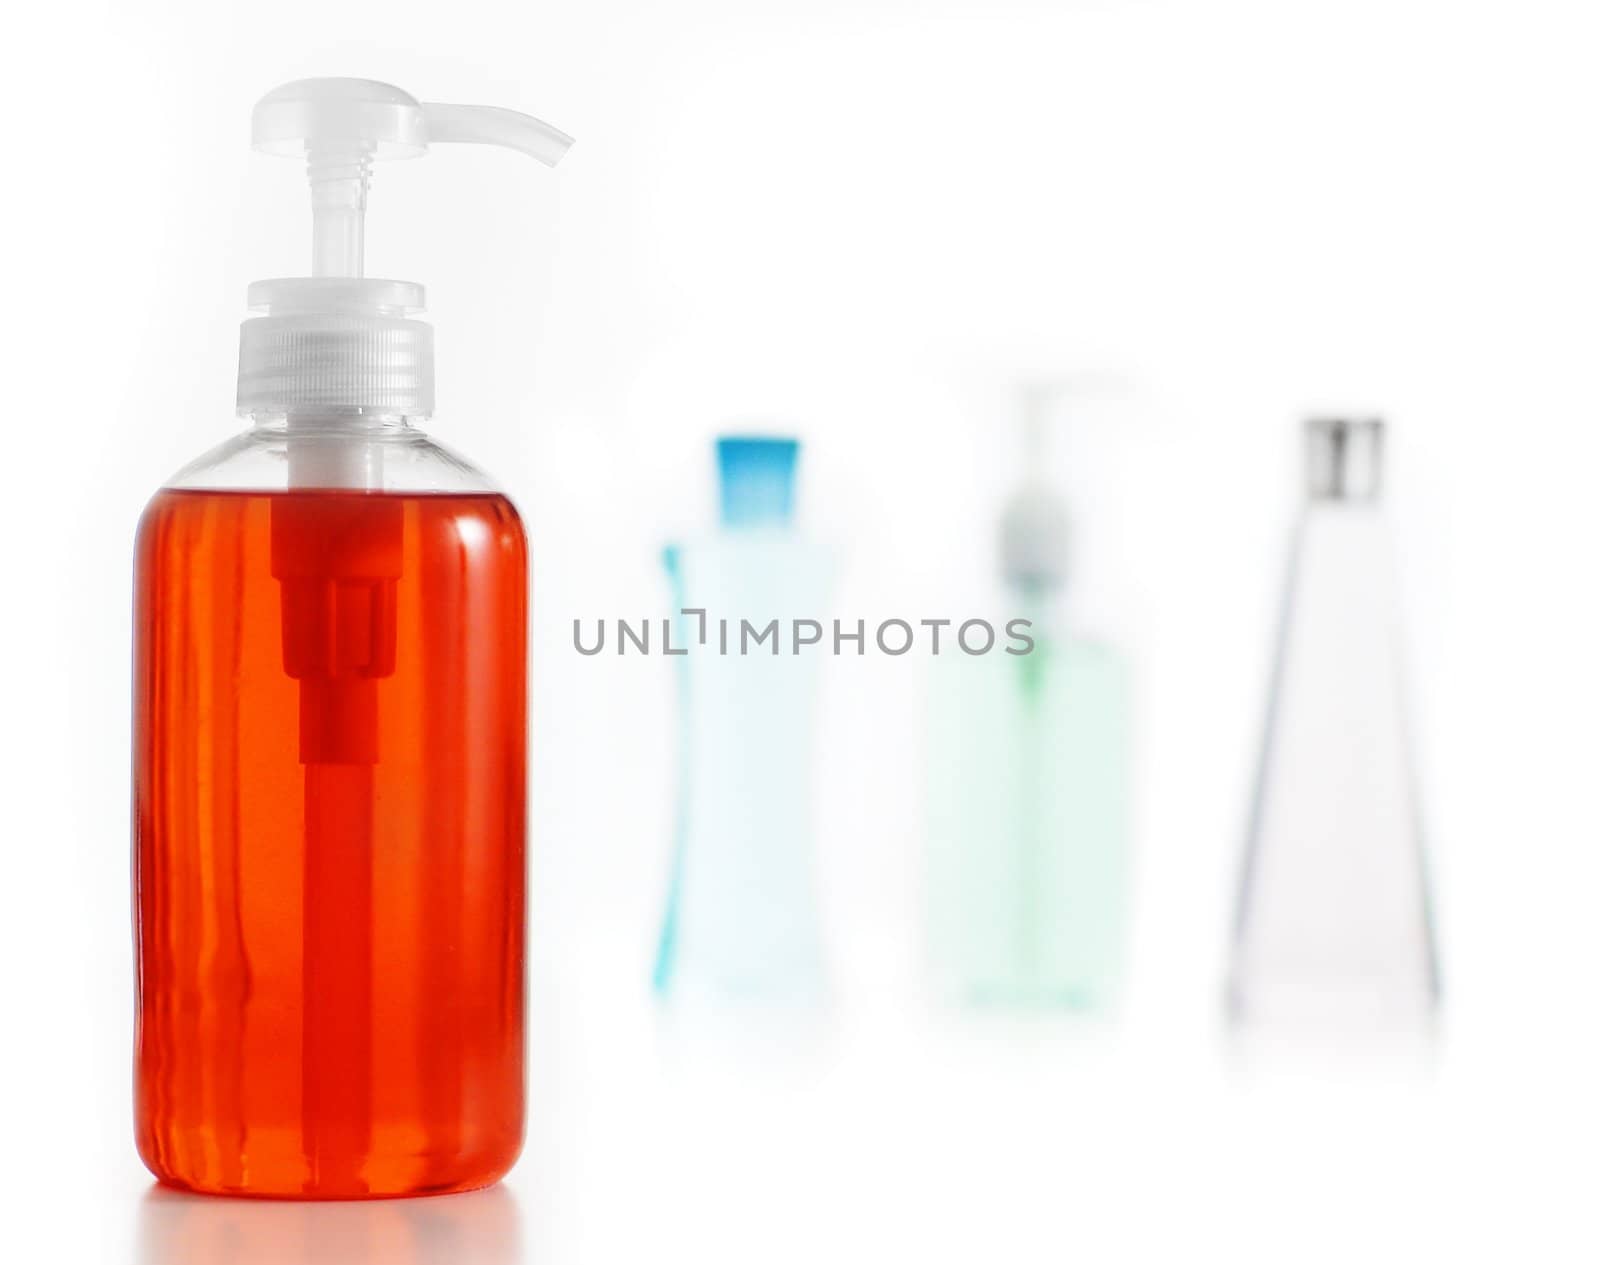 Bath product bottle against a white background.